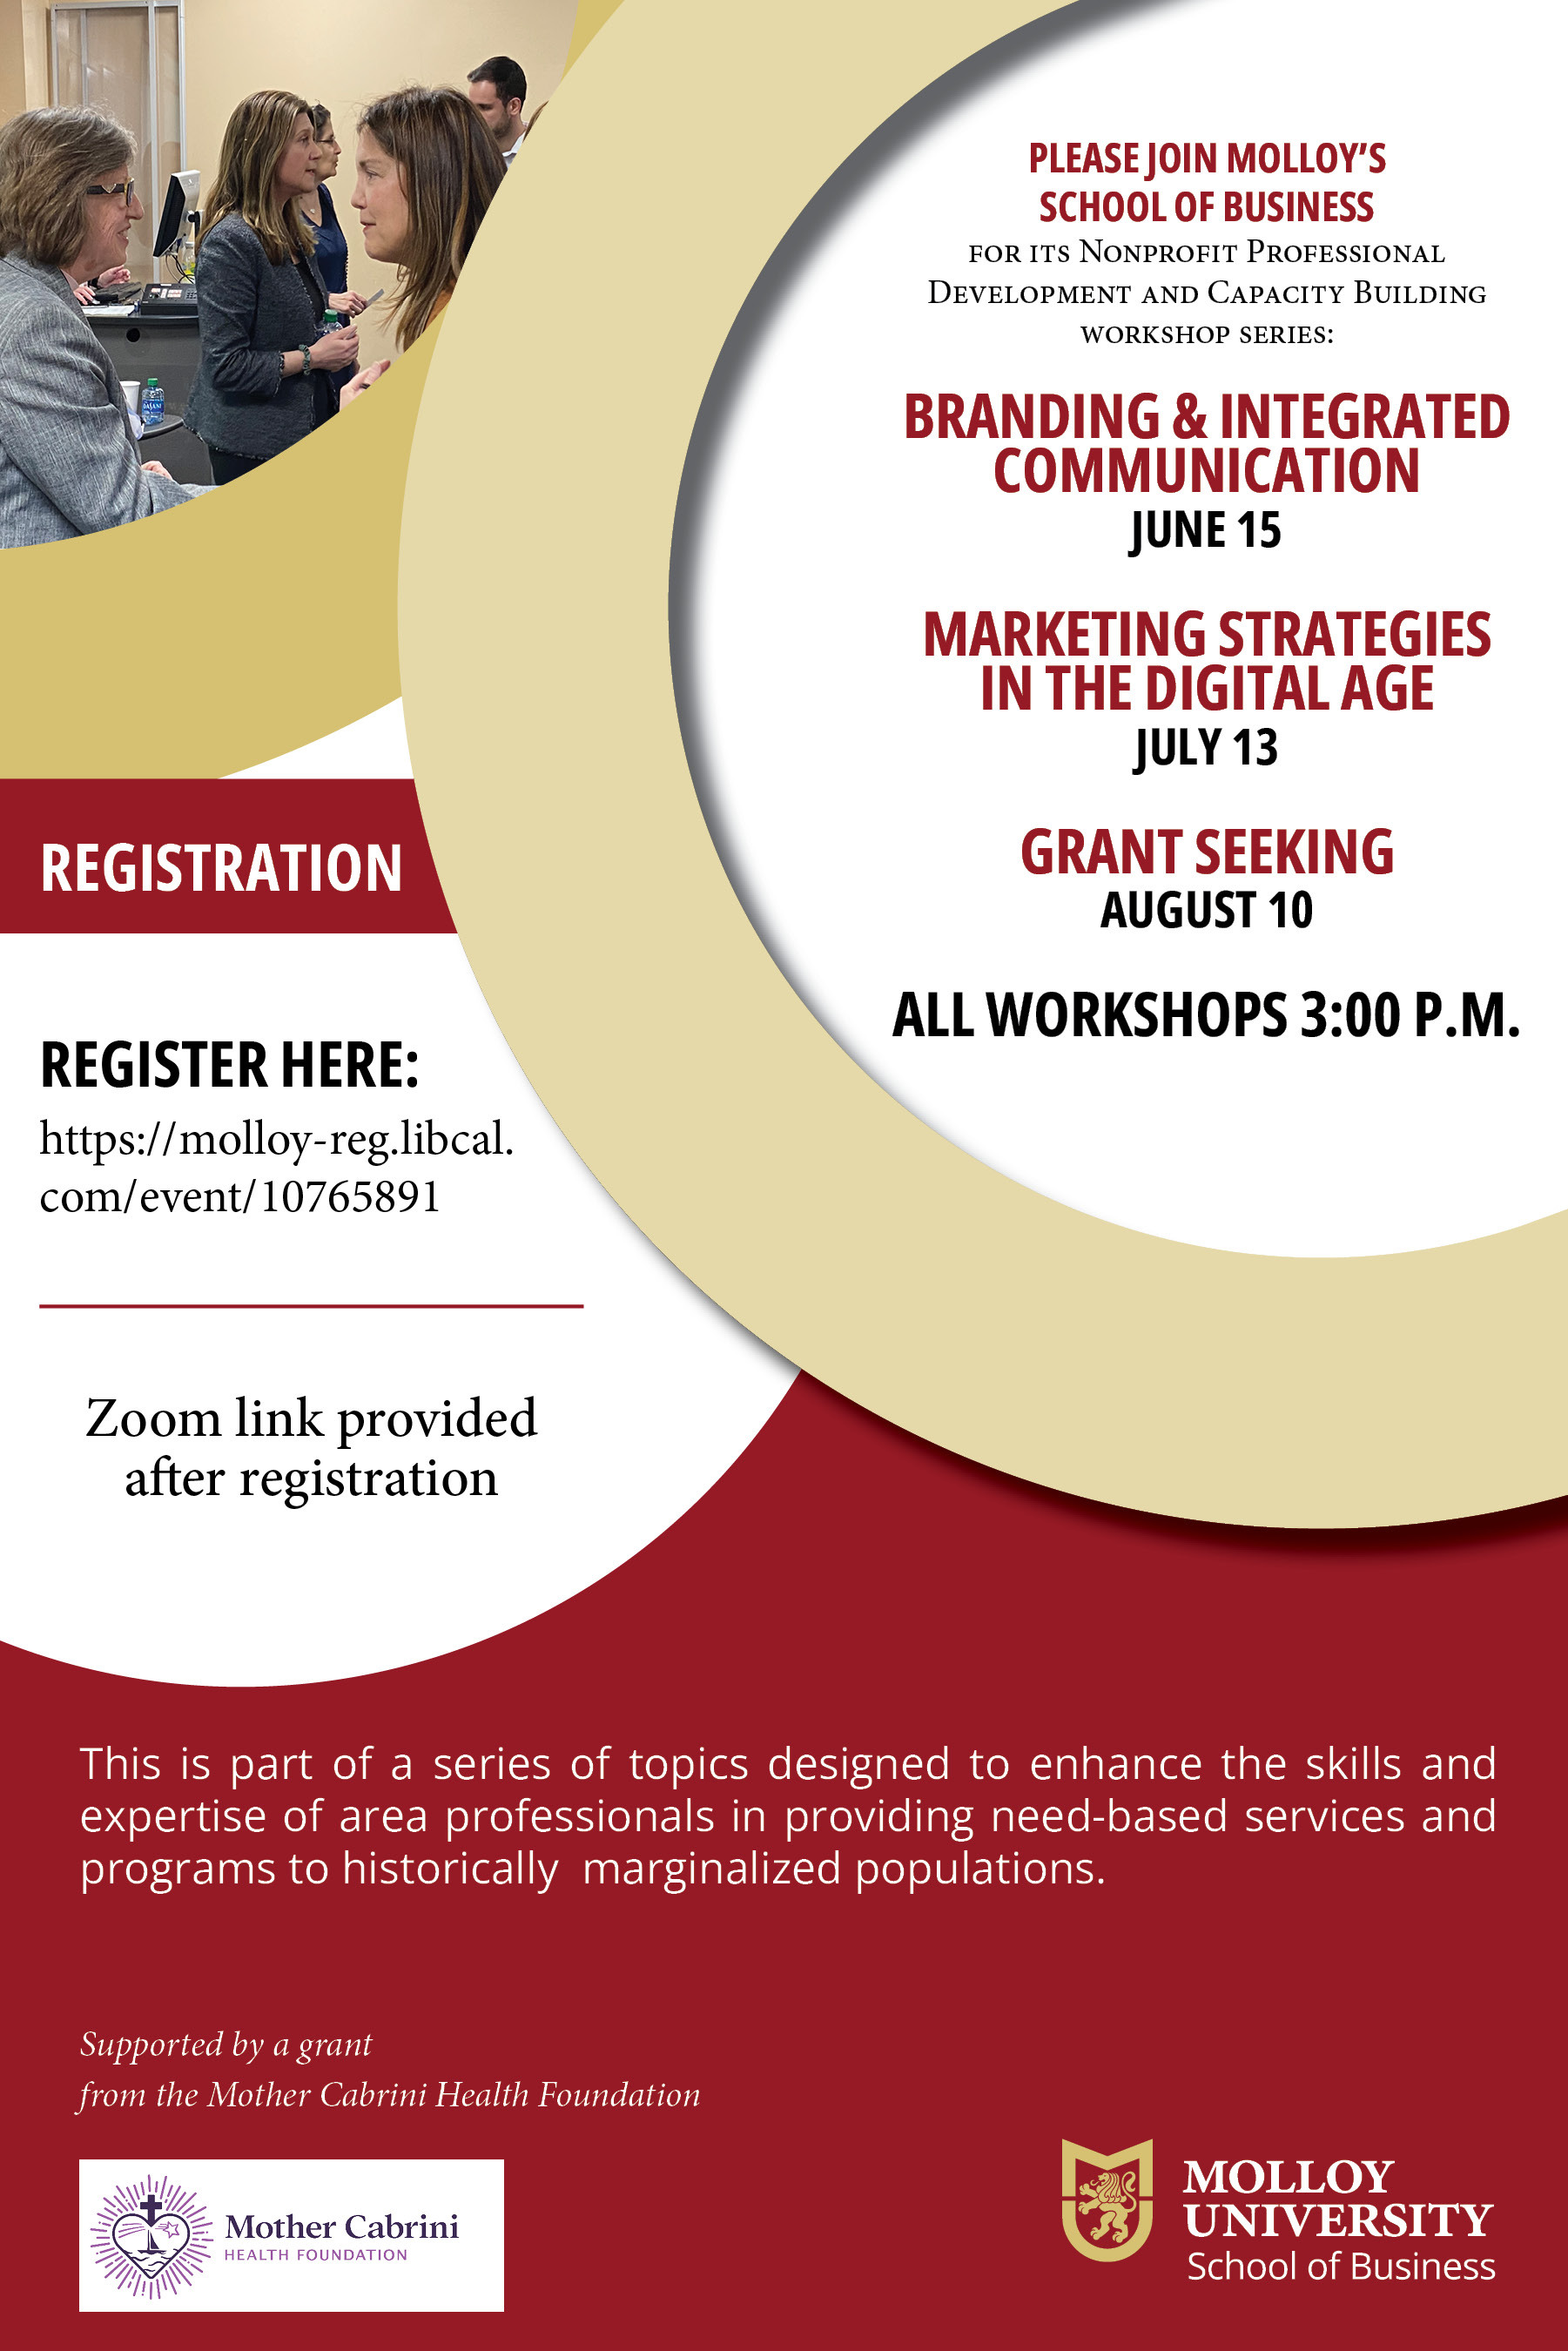 Mission and Marketing workshop on May 24, 2023